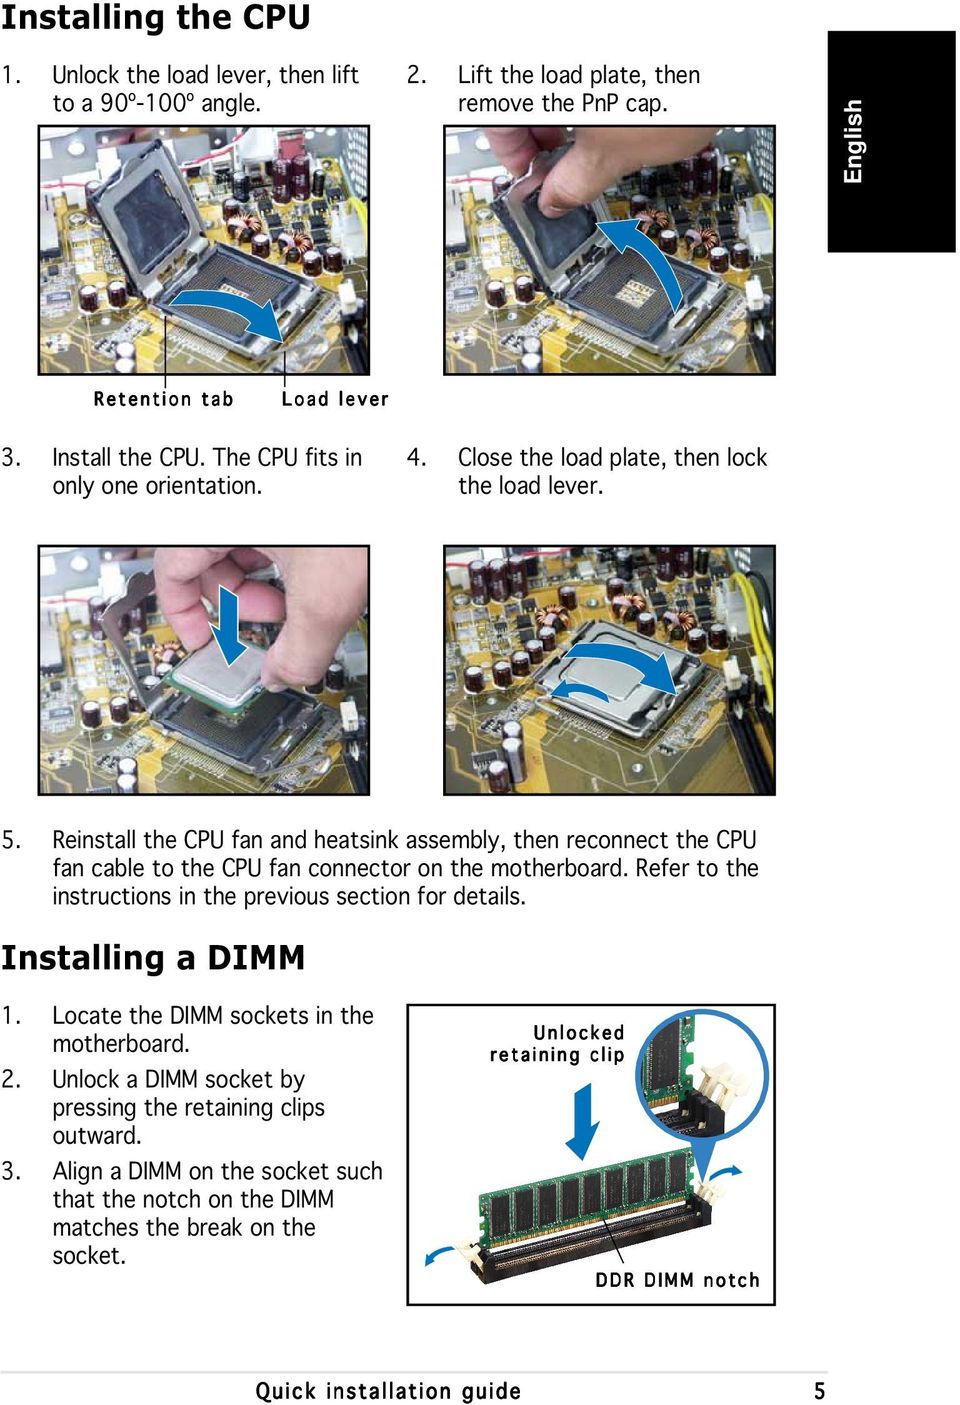 Reinstall the CPU fan and heatsink assembly, then reconnect the CPU fan cable to the CPU fan connector on the motherboard. Refer to the instructions in the previous section for details.